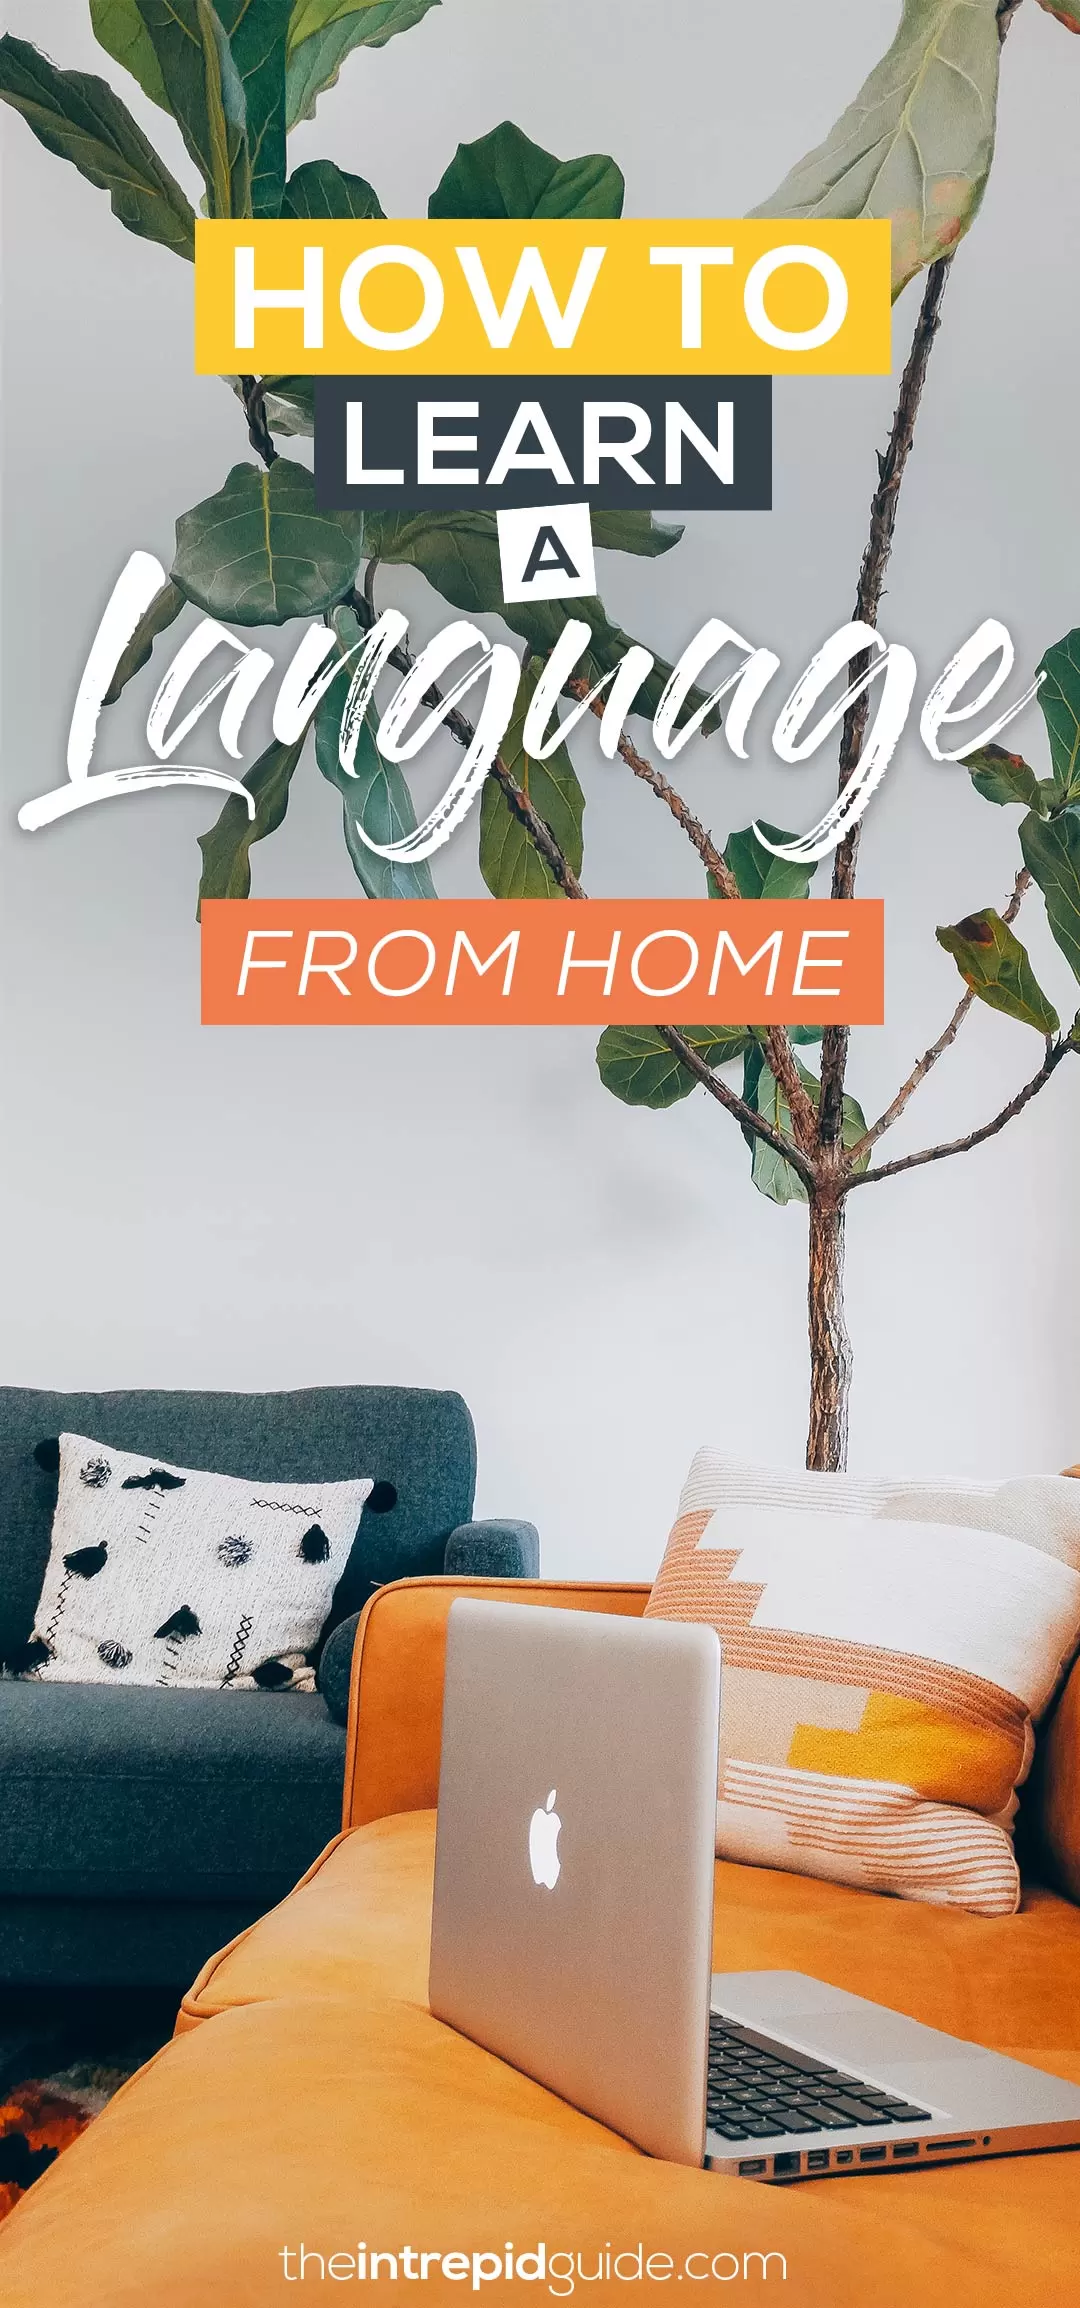 6 Top Tips for How to Learn a Language From Home